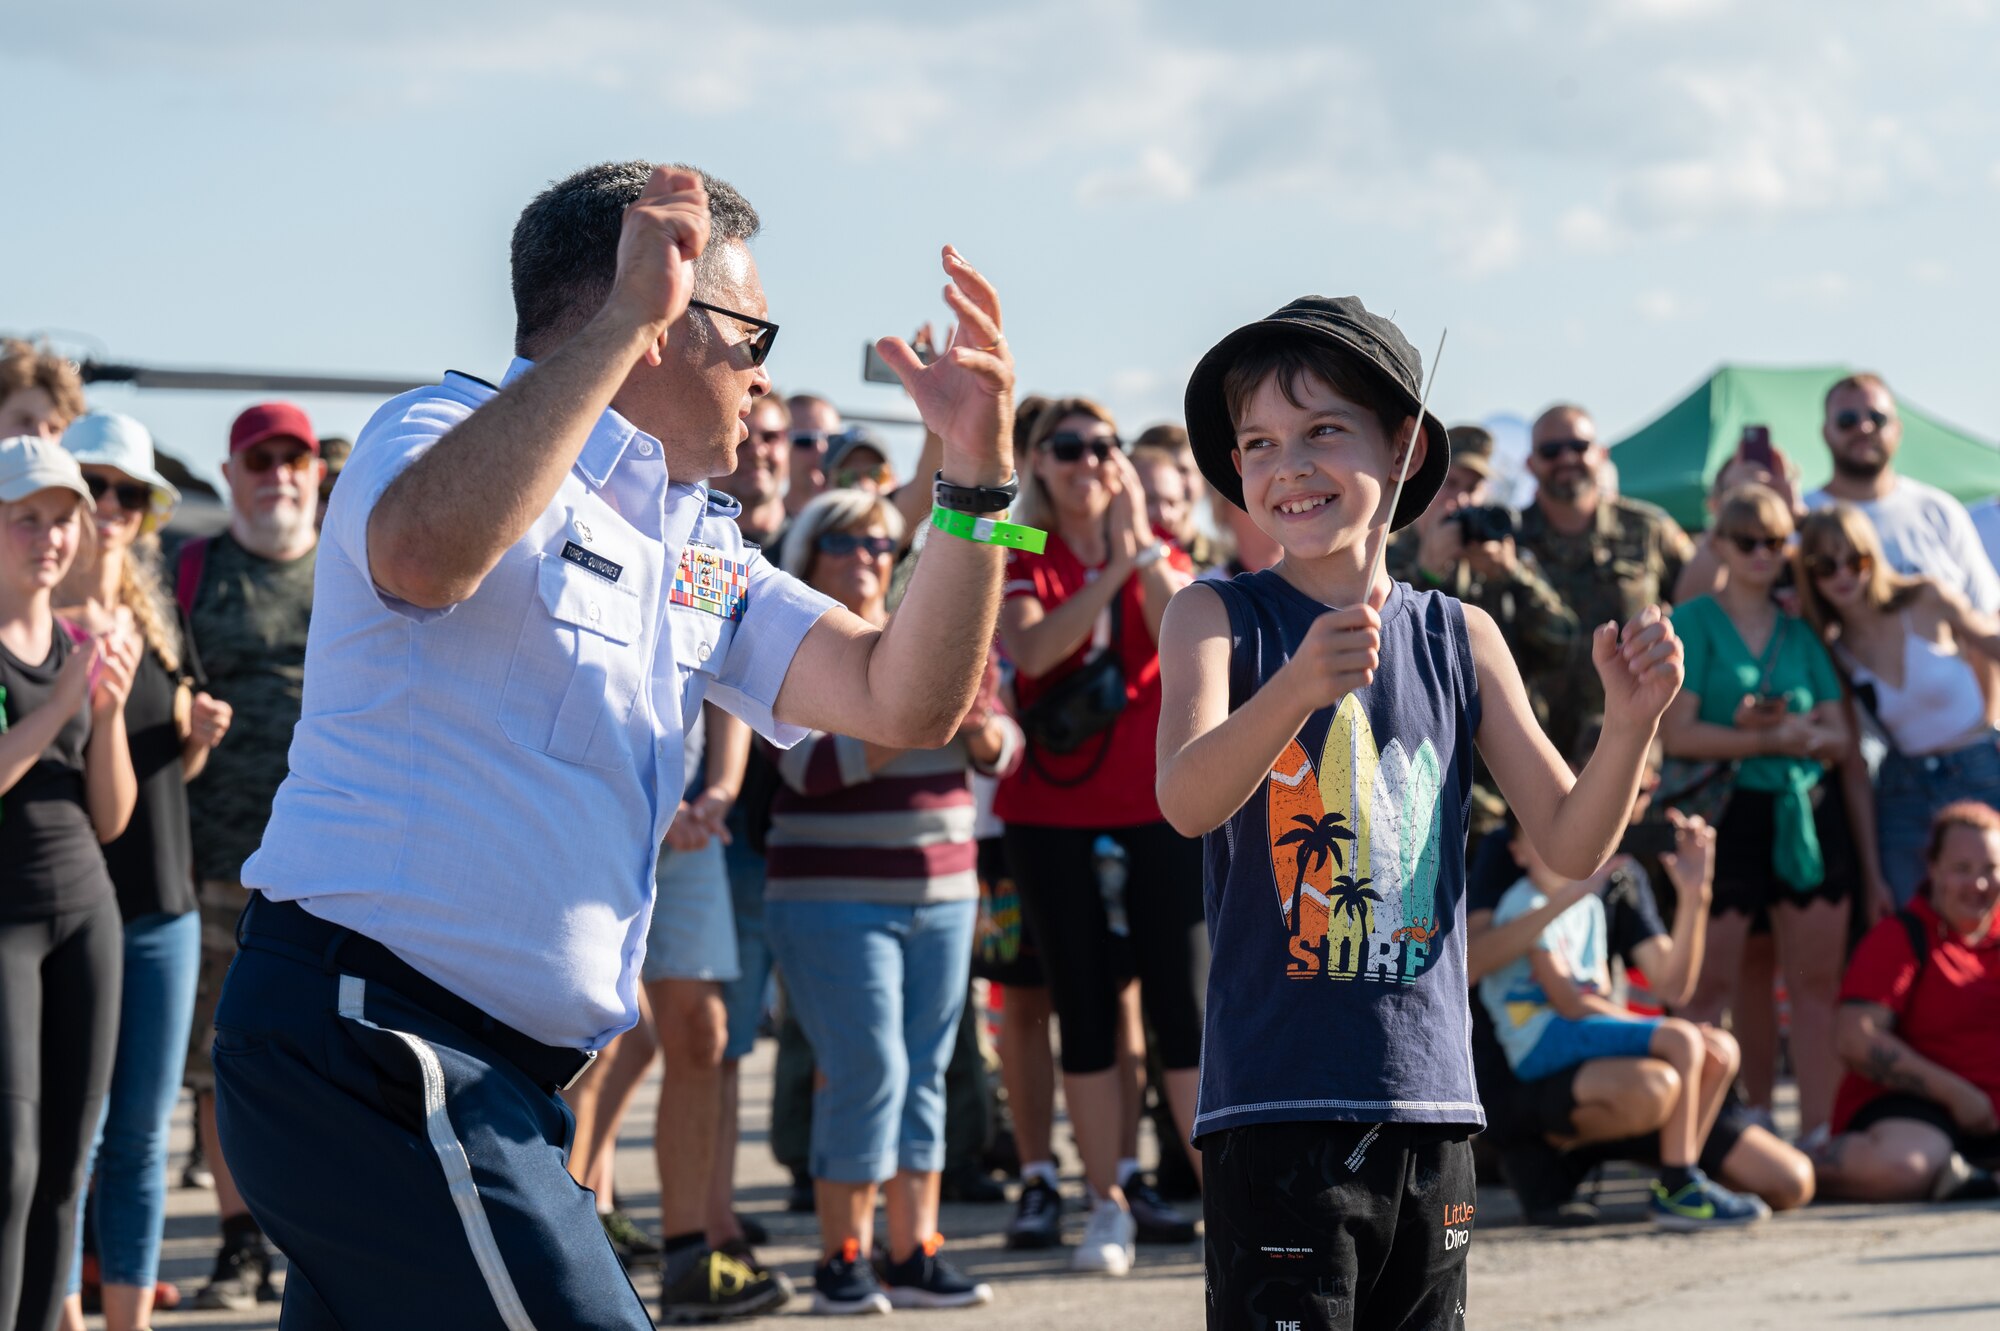 U.S. Air Force Maj. Rafael F. Toro-Quiñones, U.S. Air Forces in Europe Band commander and conductor, shows a Czech child how to conduct the band during a performance during the NATO Days event at Leoš Janáček Airport in Ostrava, Czech Republic, Sept. 16, 2023.